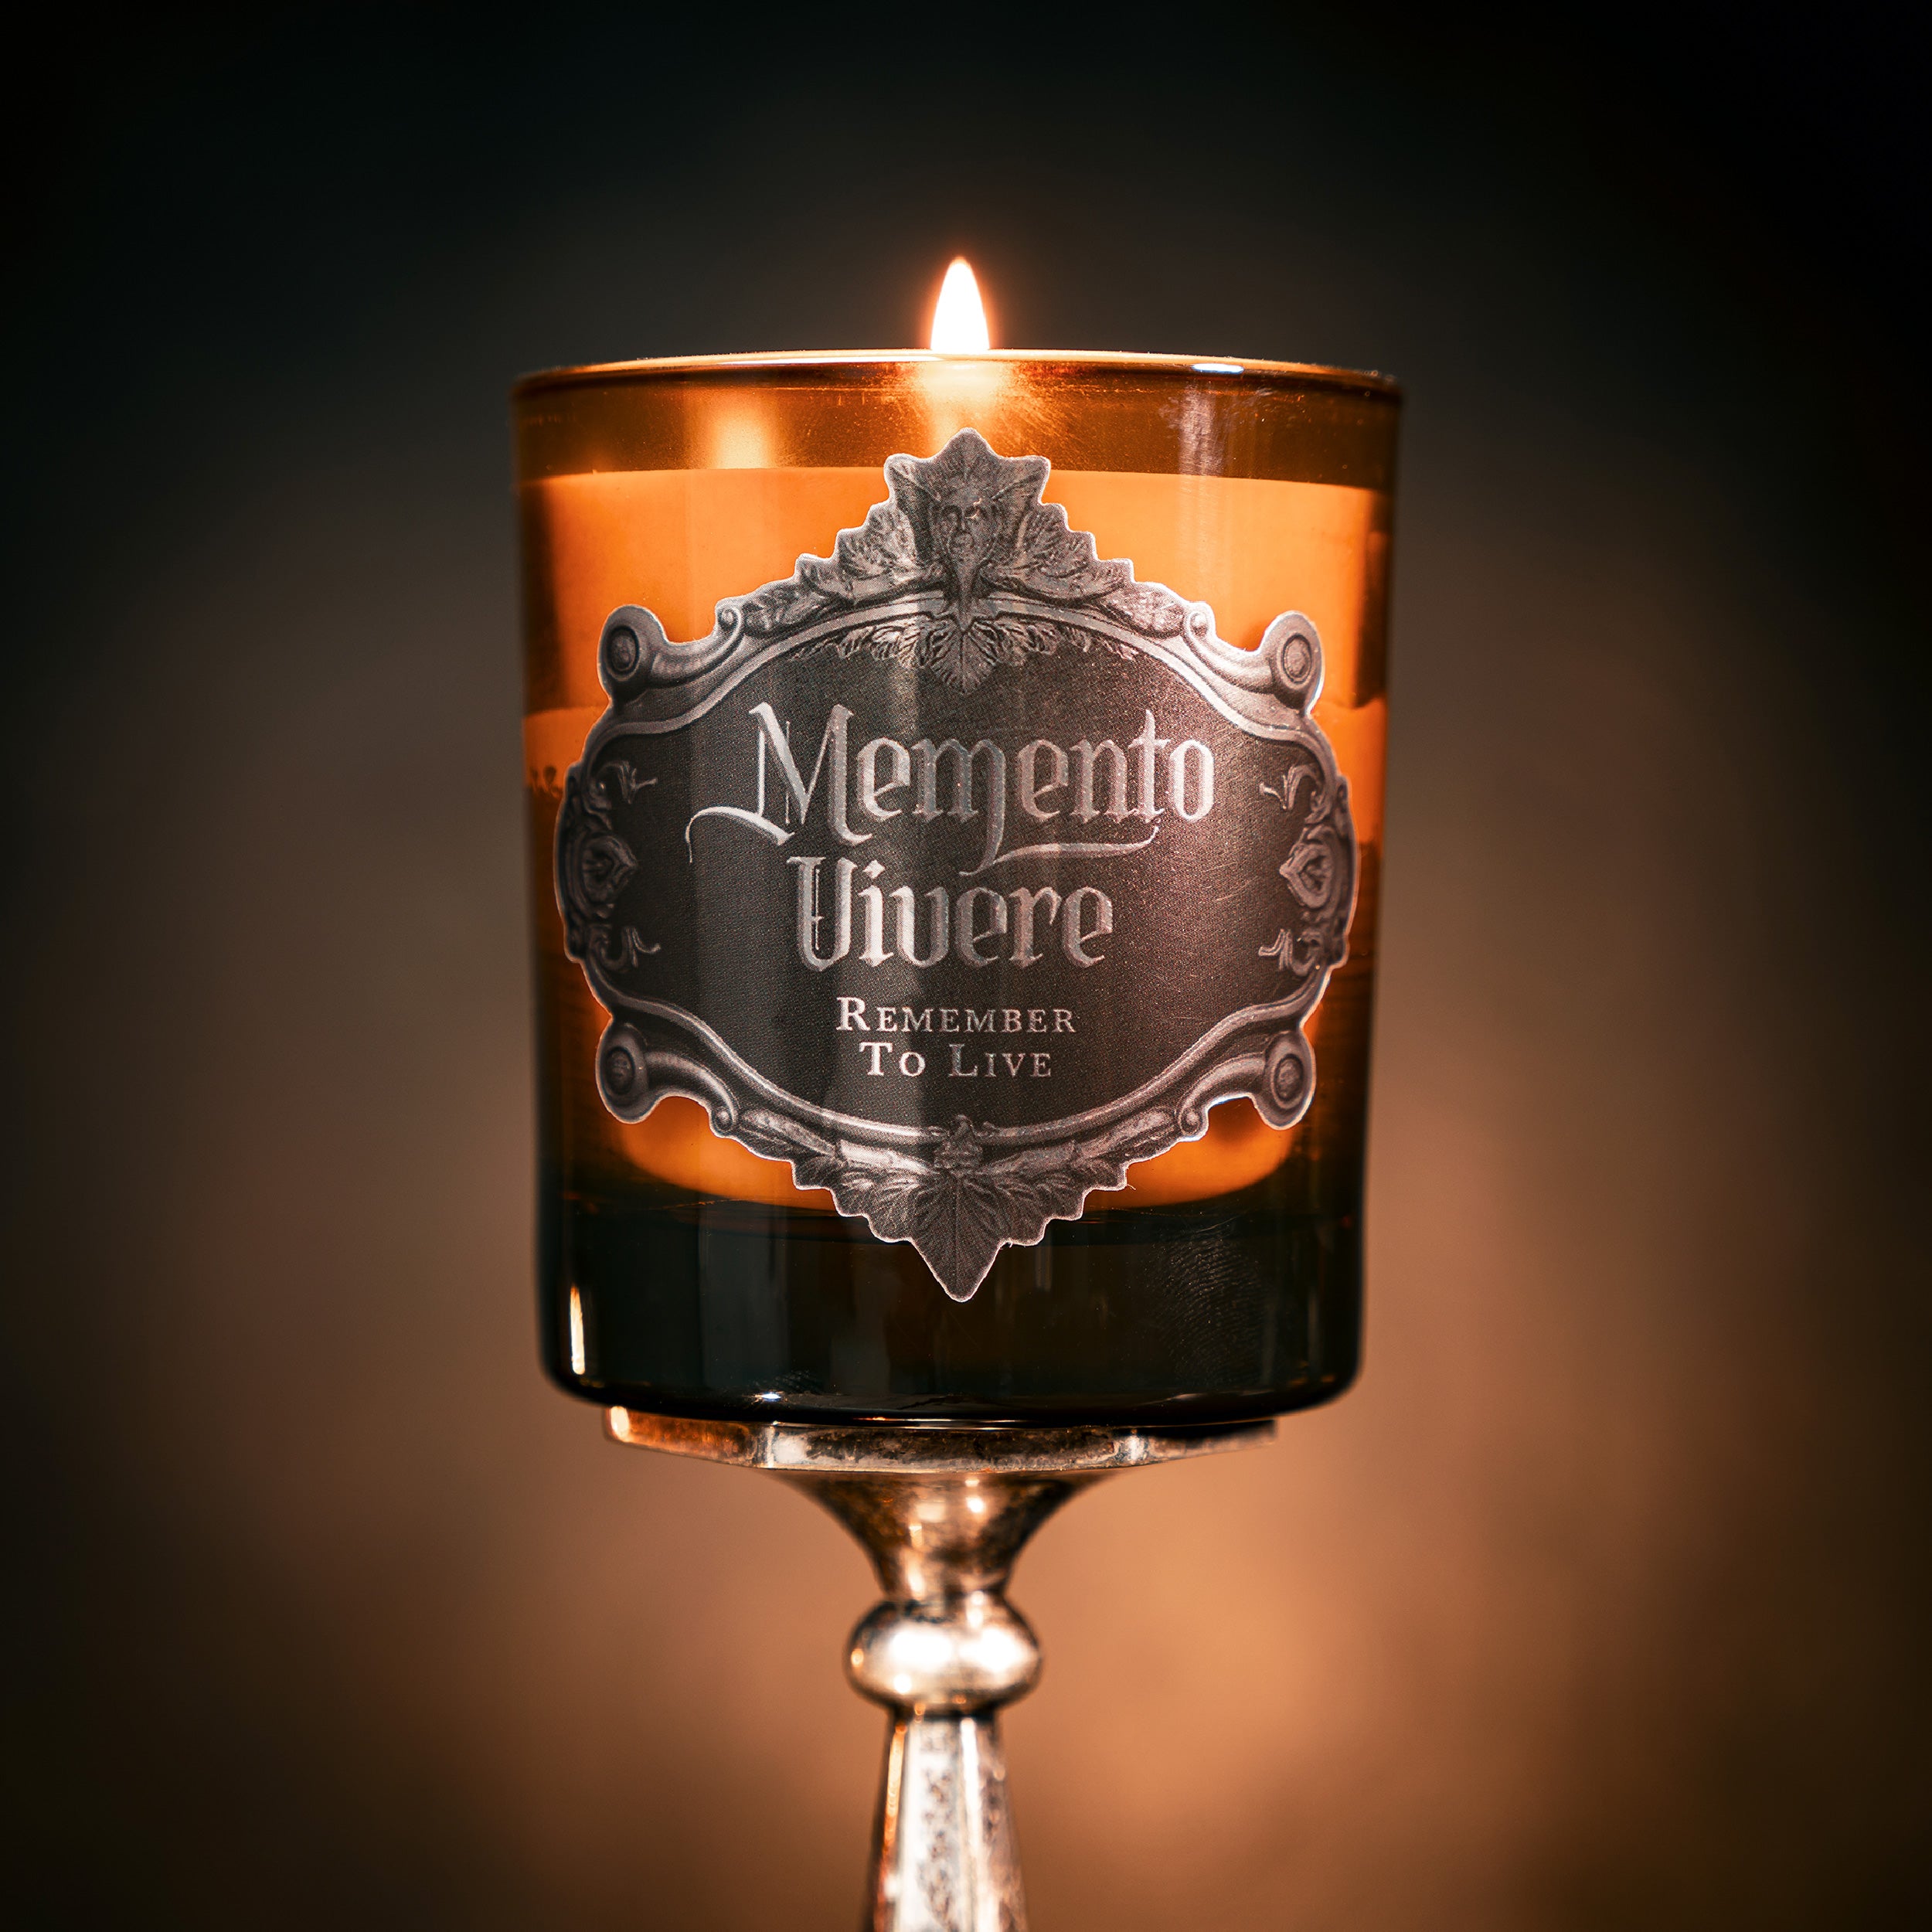 memento vivere jar candle gothic candle the blackened teeth